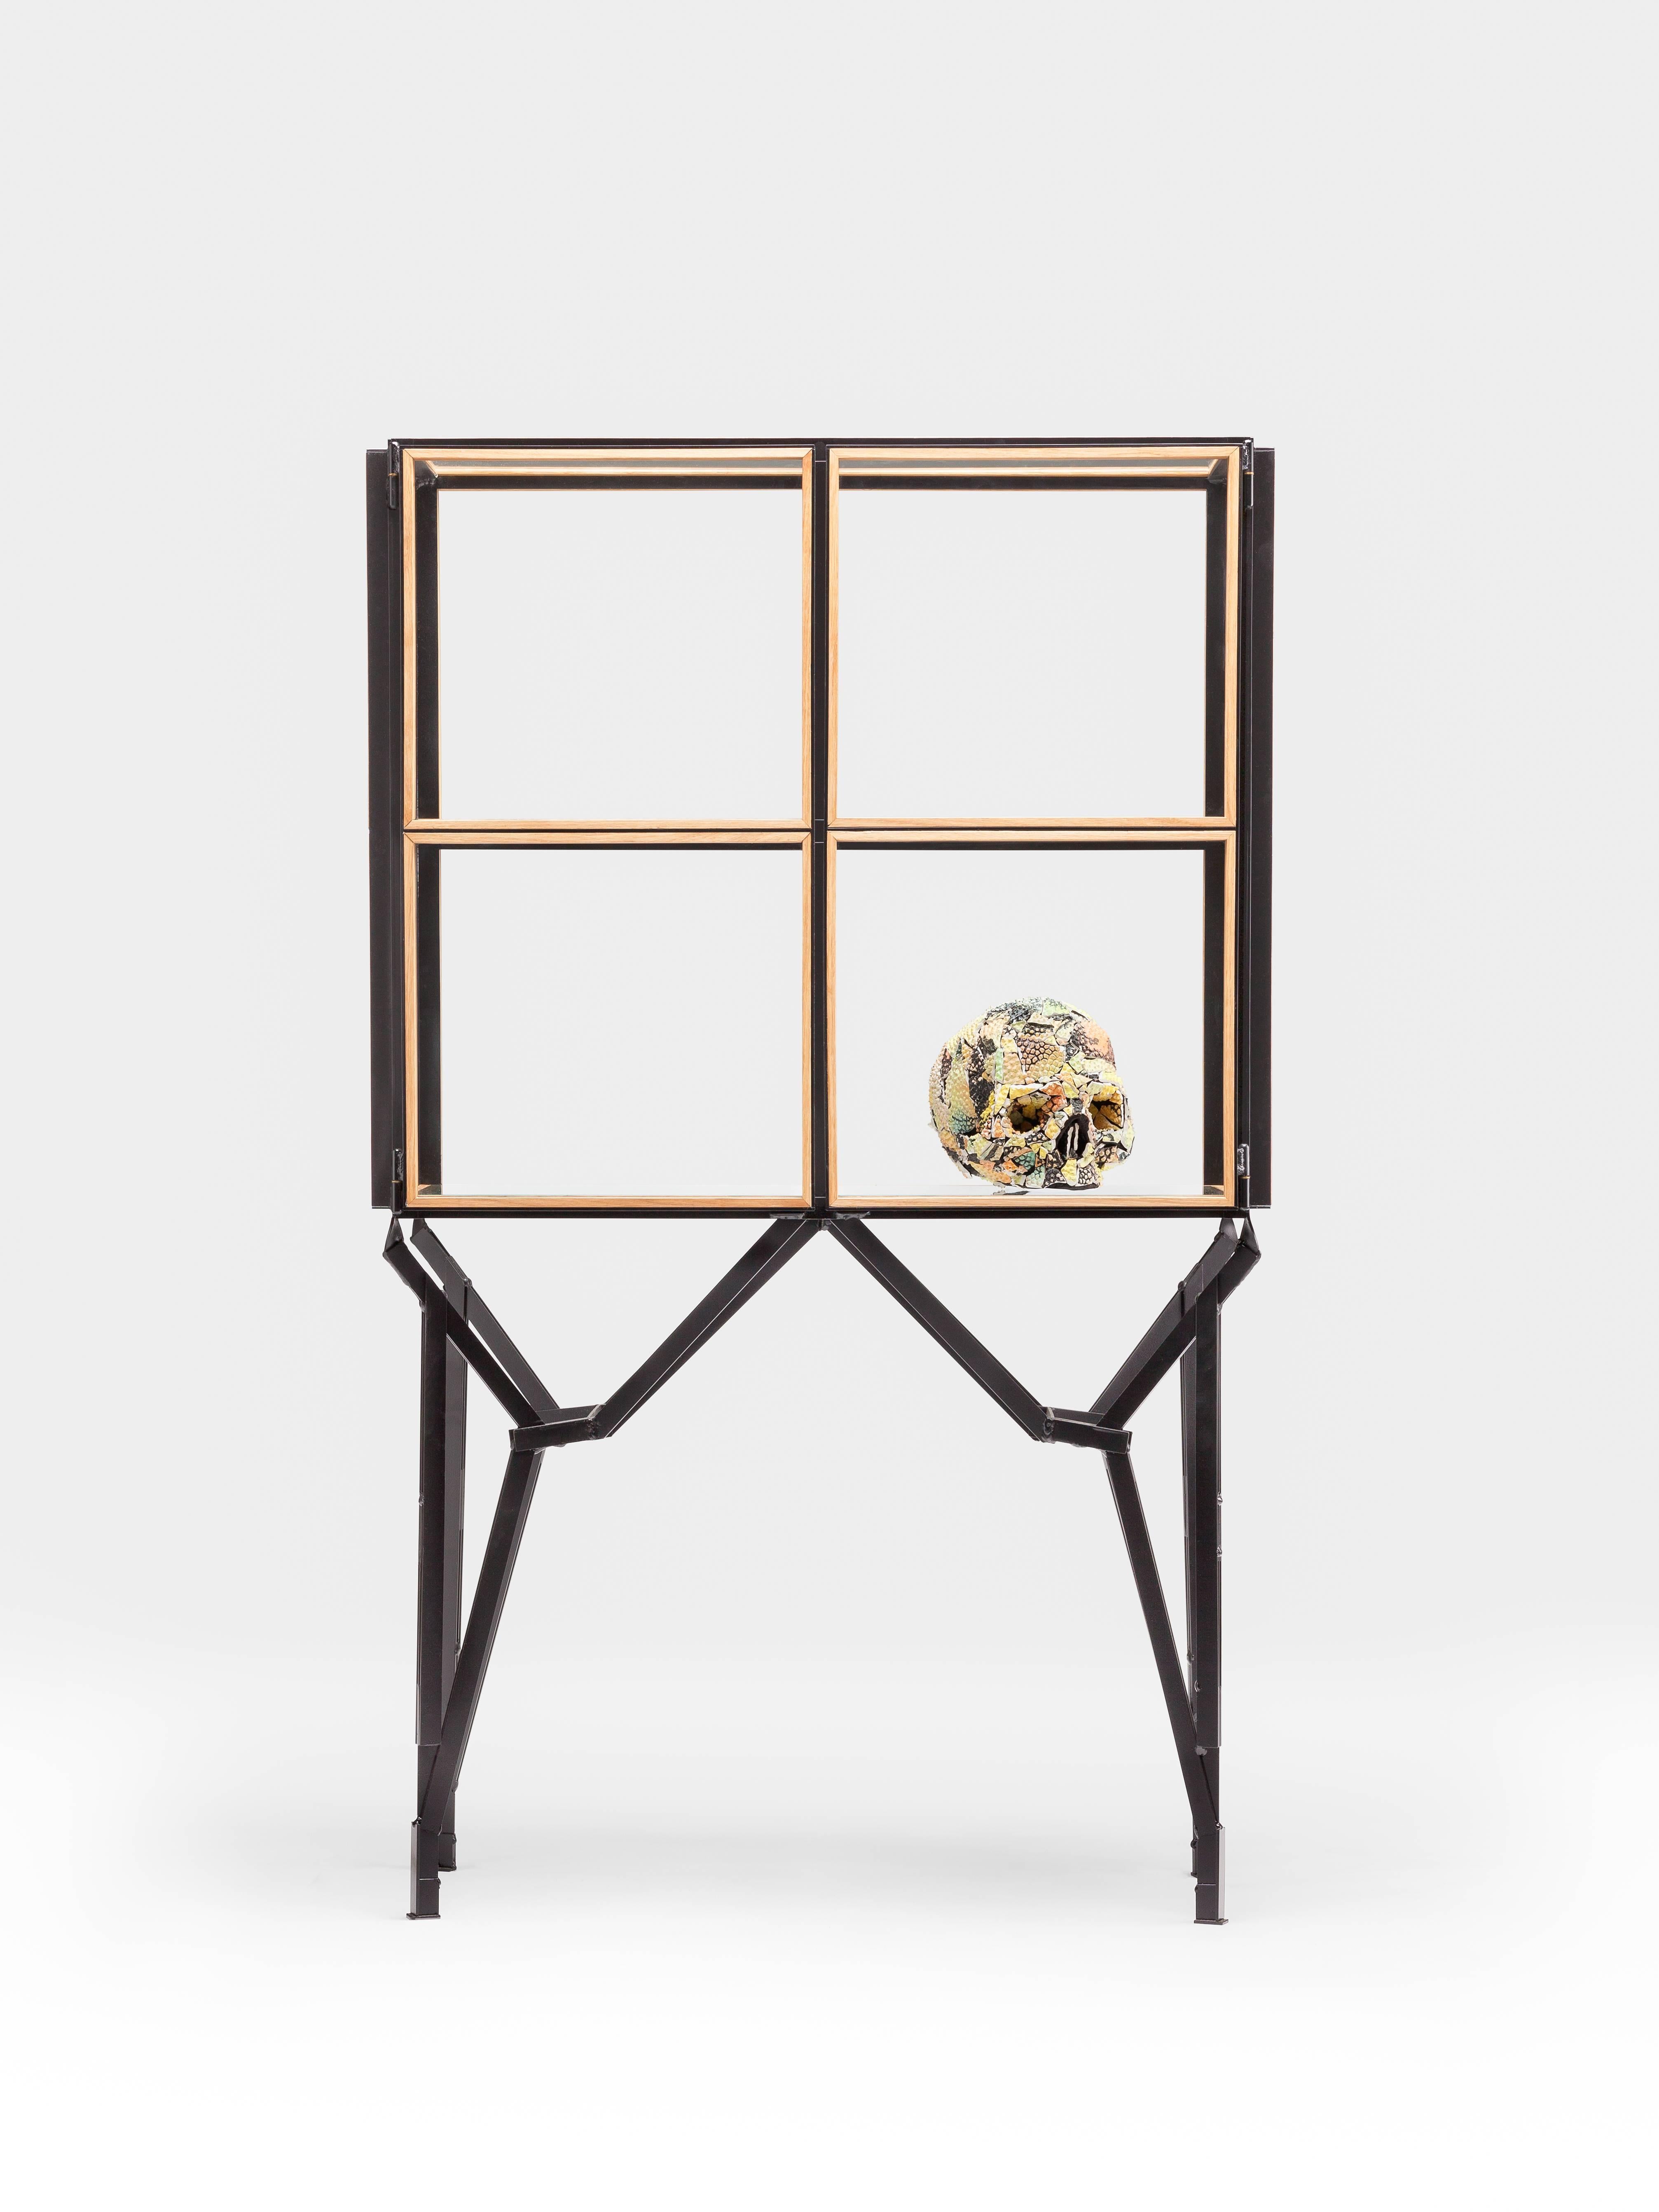 A timeless 2 x 2 cabinet with a modular design and concealed doors to display treasured items.
Inspired on the demolished Philips factory buildings of Eindhoven and their windows.
Handcrafted wooden glass-slats holding glass panels set in a